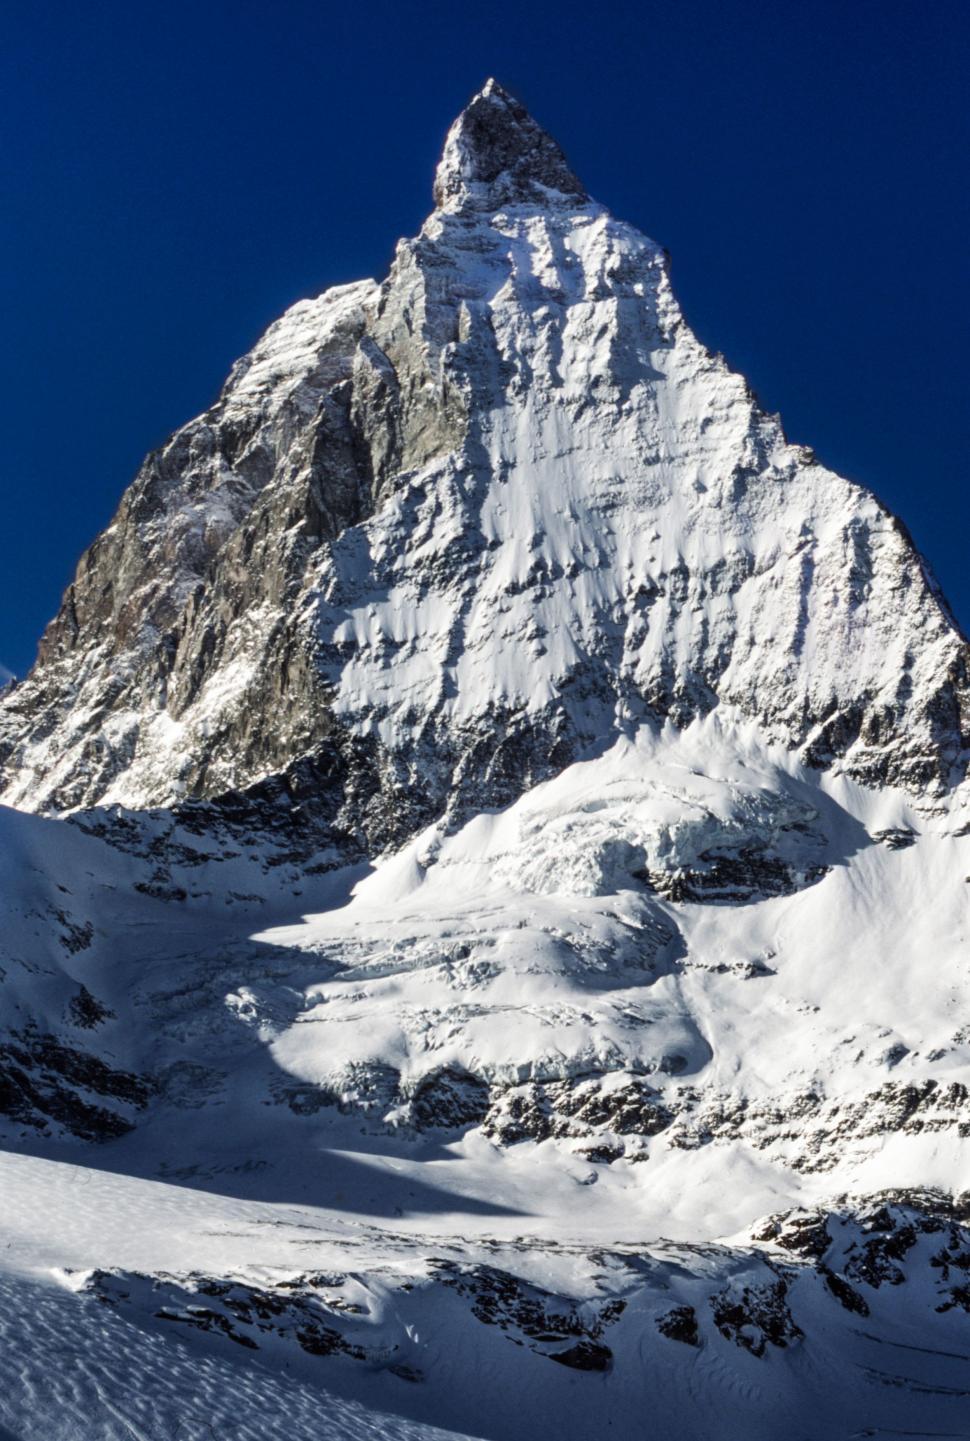 Free Image of Snow Covered Mountain With Blue Sky 